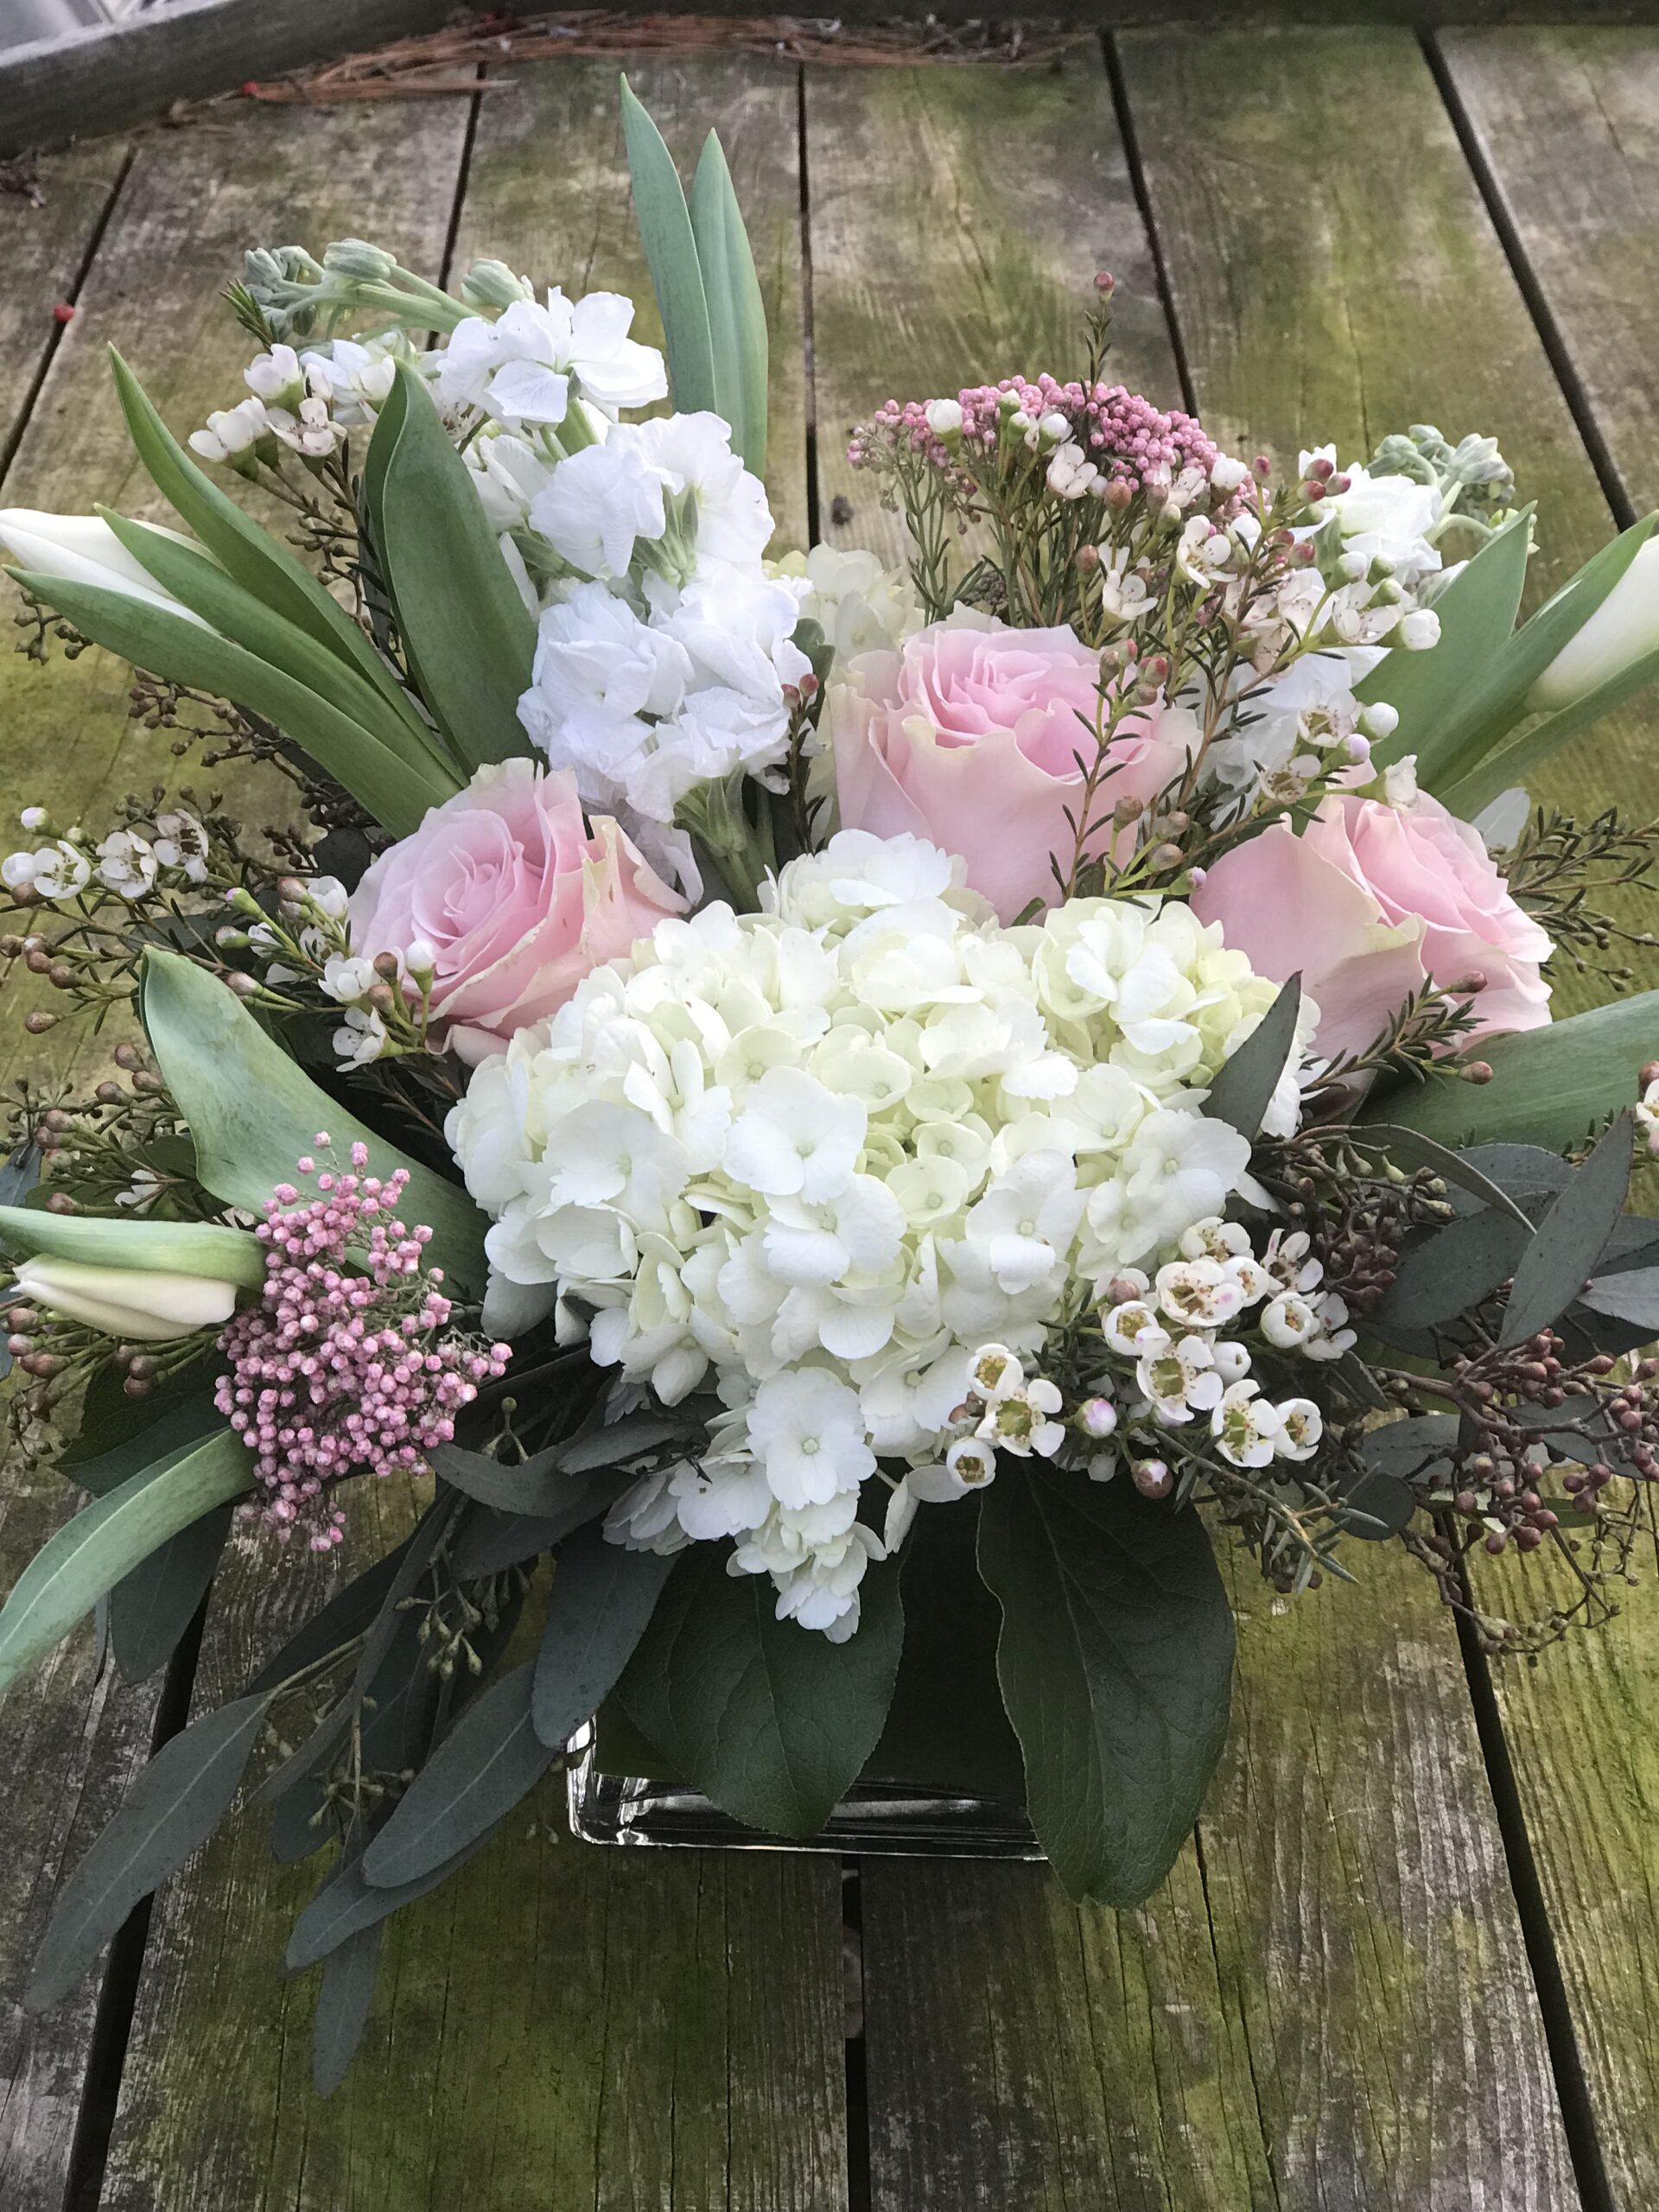 White and Pink Color Flowers in a Glass Vase